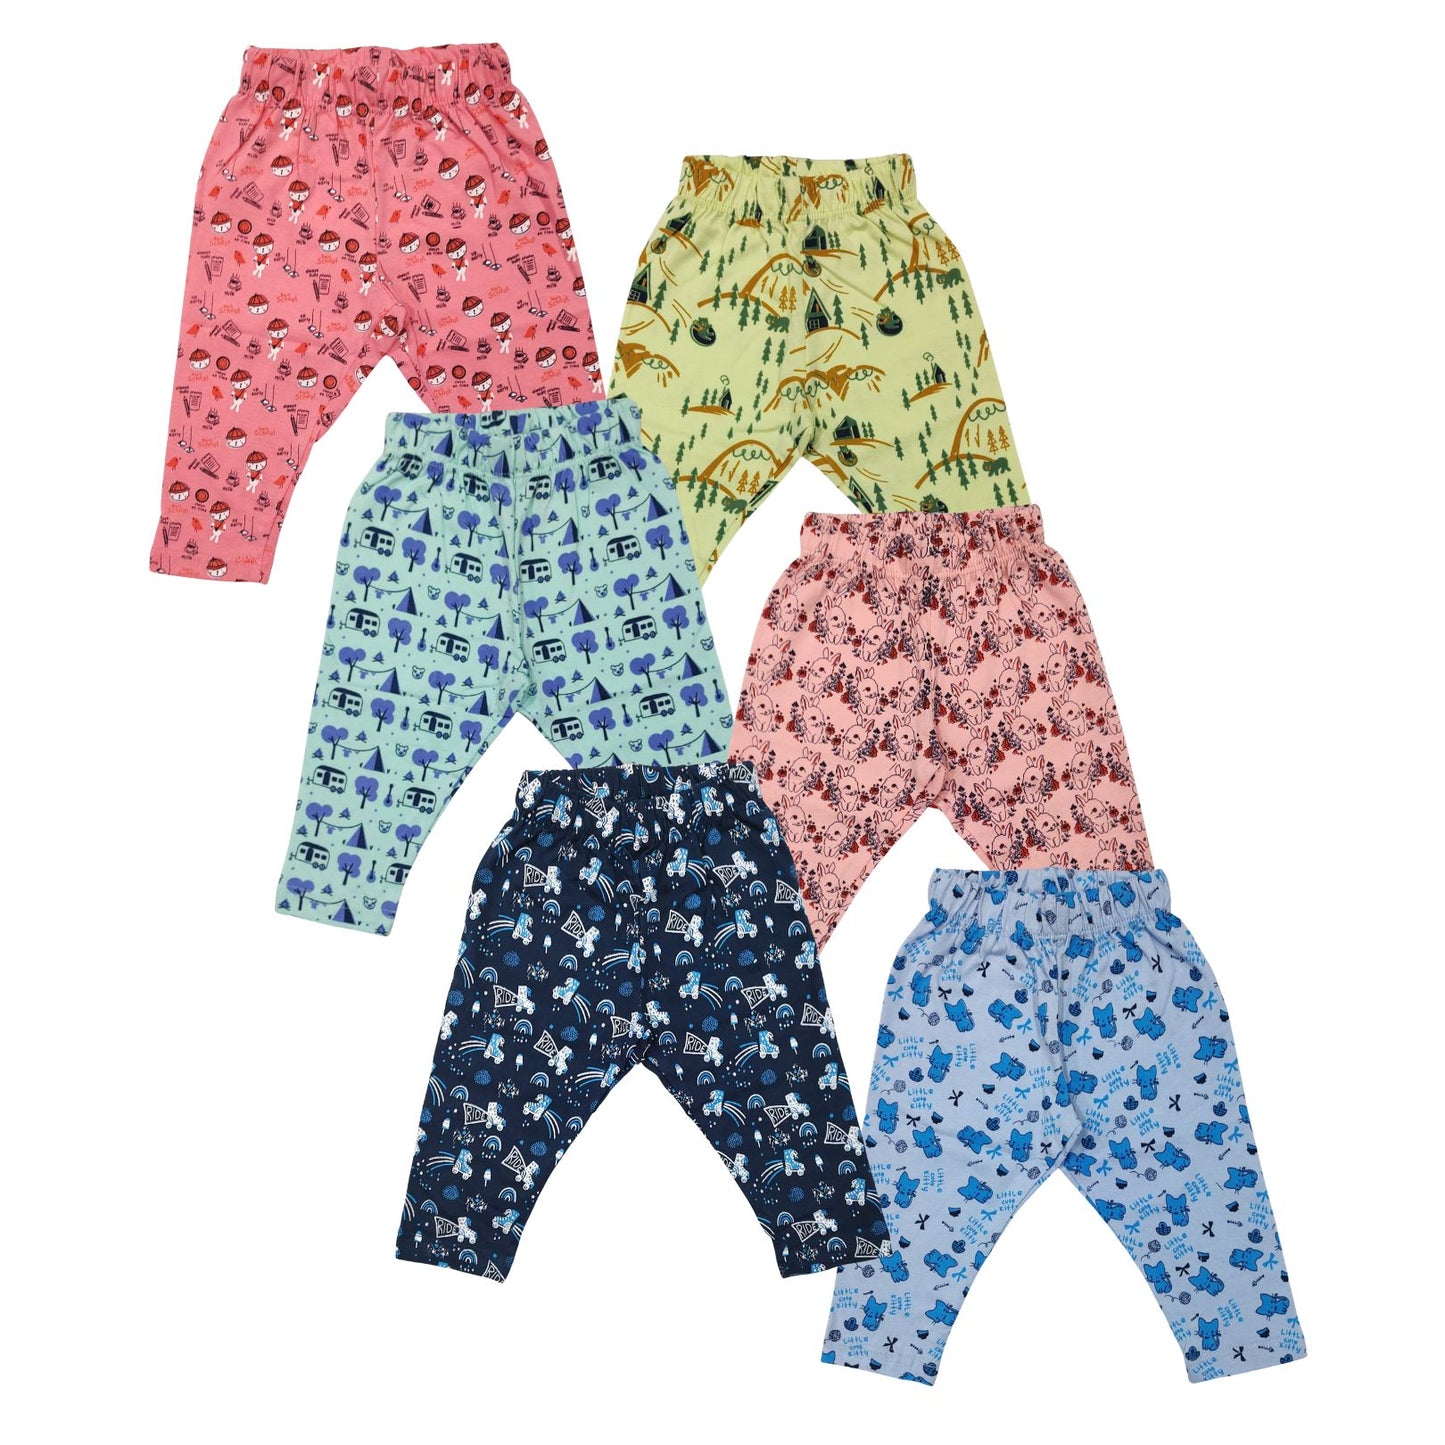 Baby Pyjama, For Baby, Infants & Toddlers, Multicolour, 100% Cotton, Baby Pyjama, Bottoms, Baby Clothes, Kids Clothing, Pack Of 6